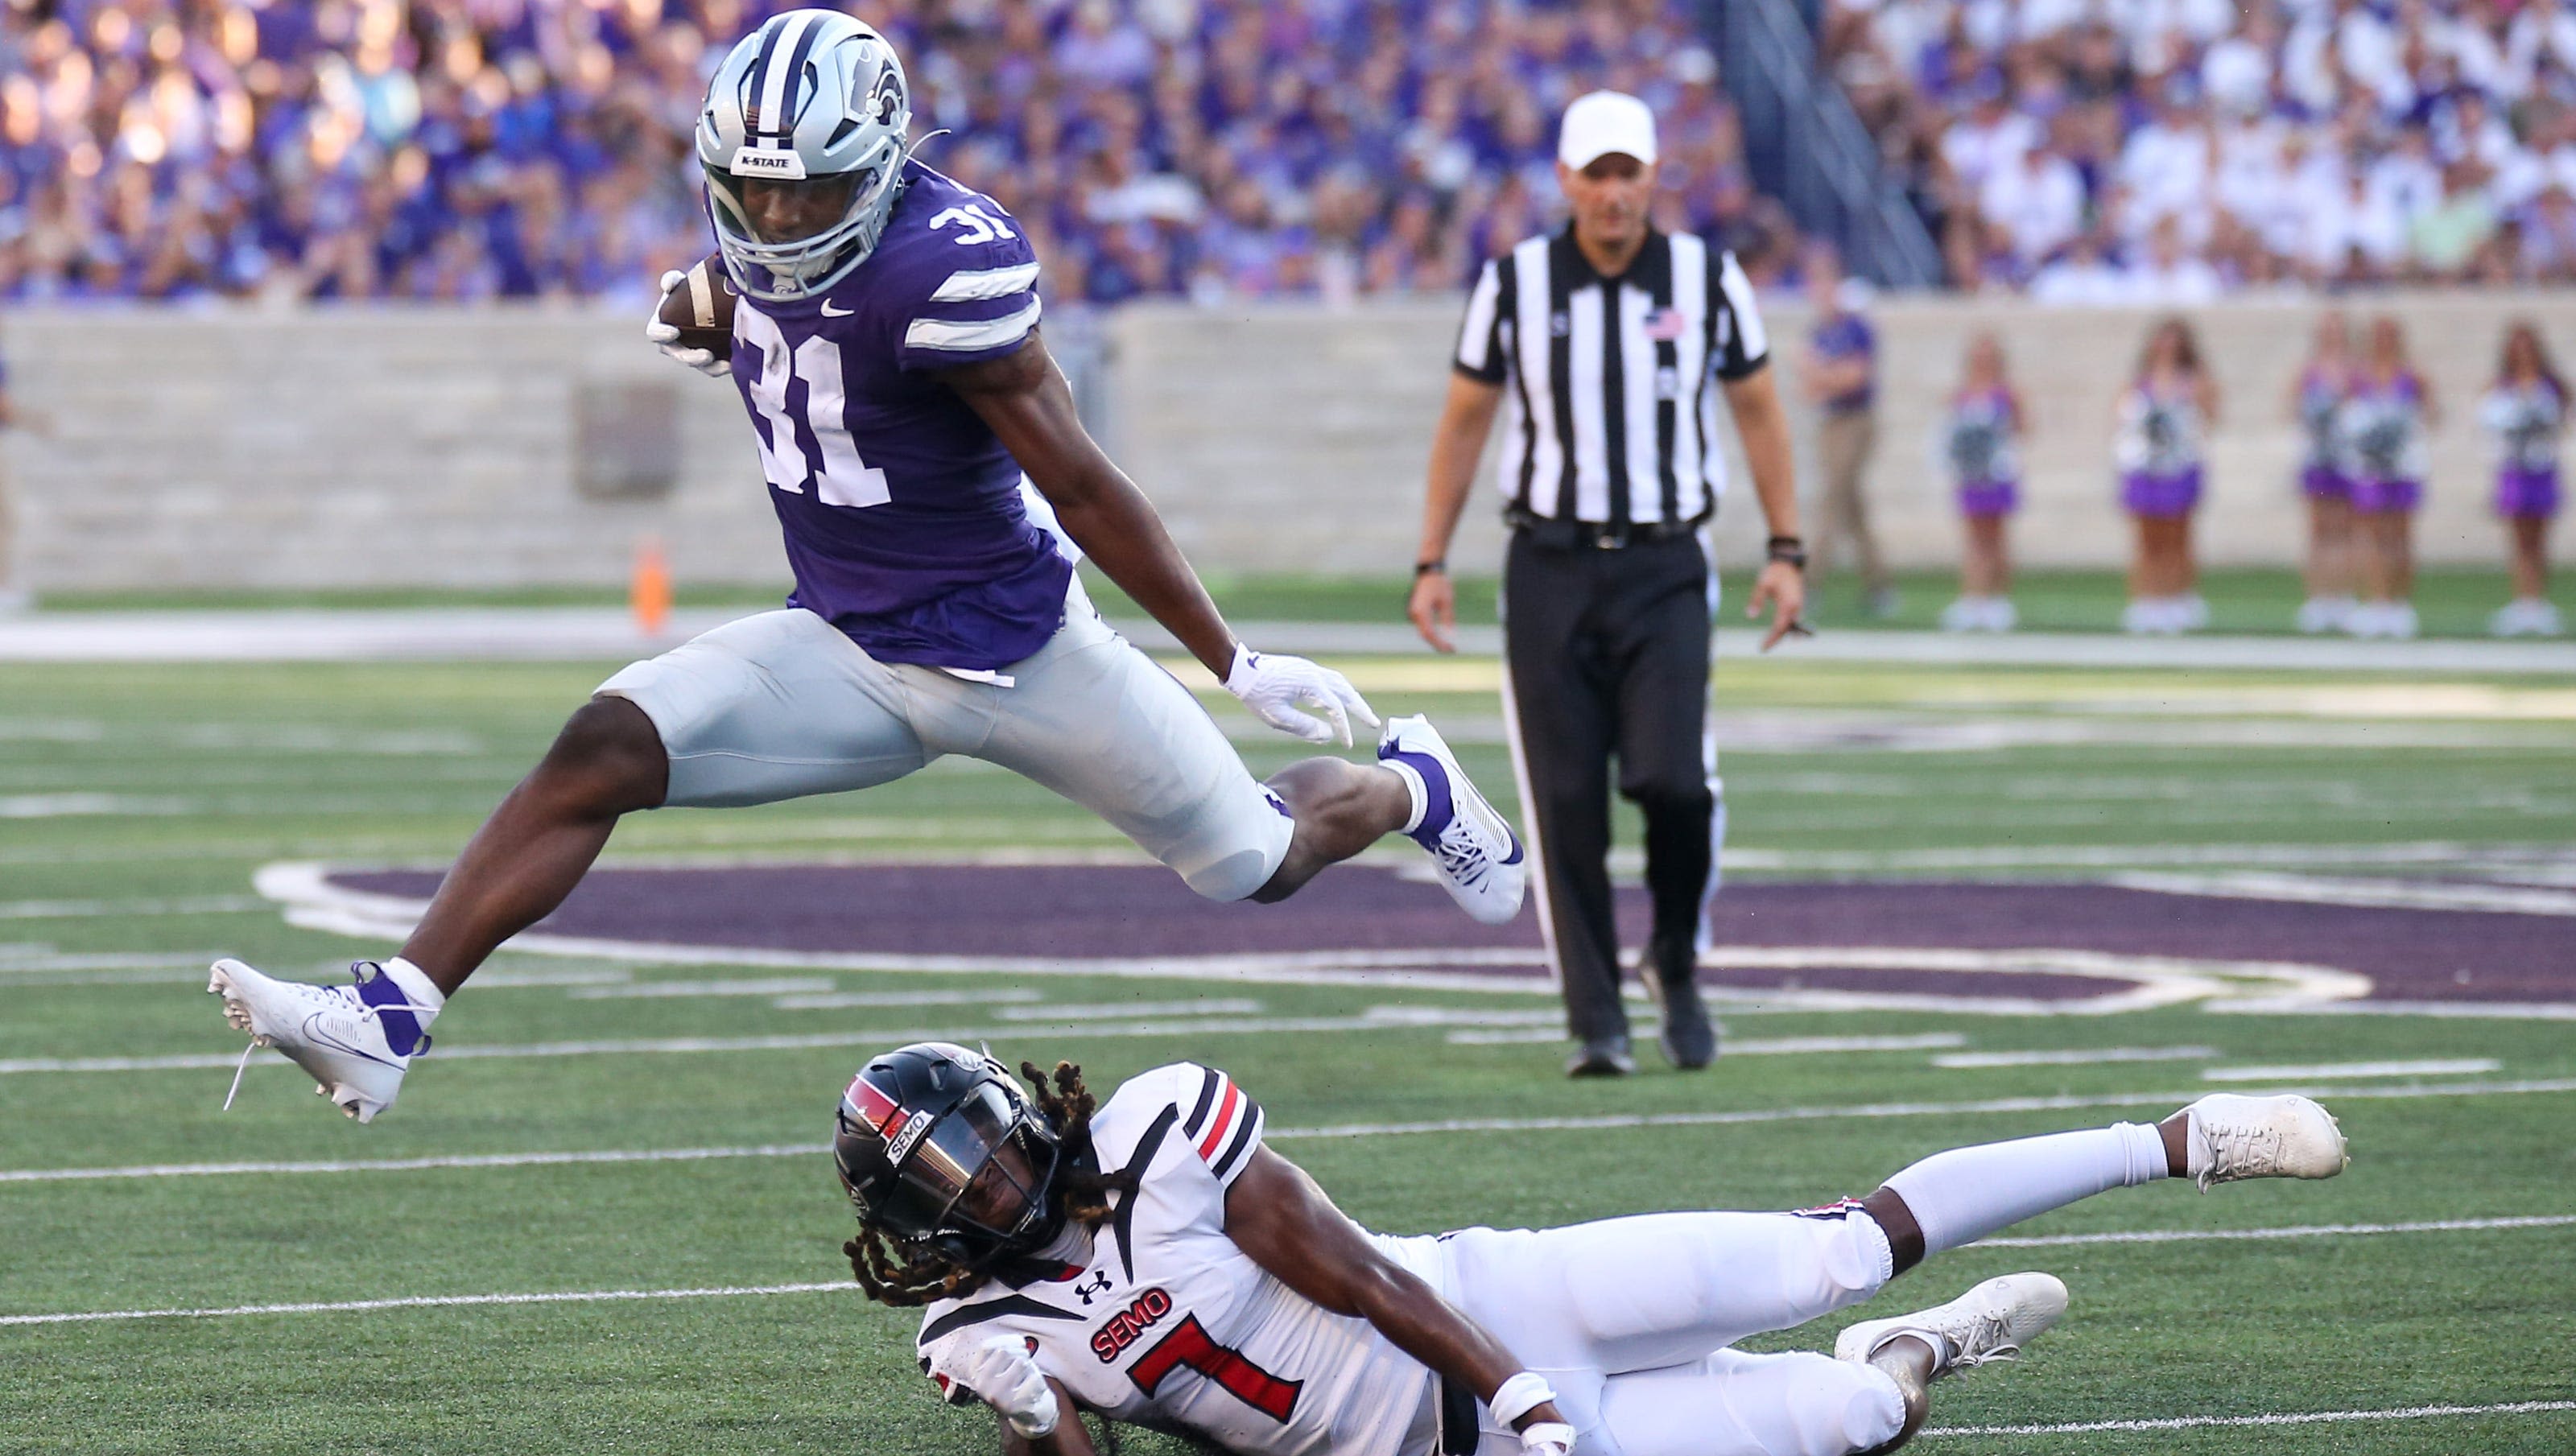 DJ Giddens and Dylan Ewards give Kansas State football running game a potent one-two punch